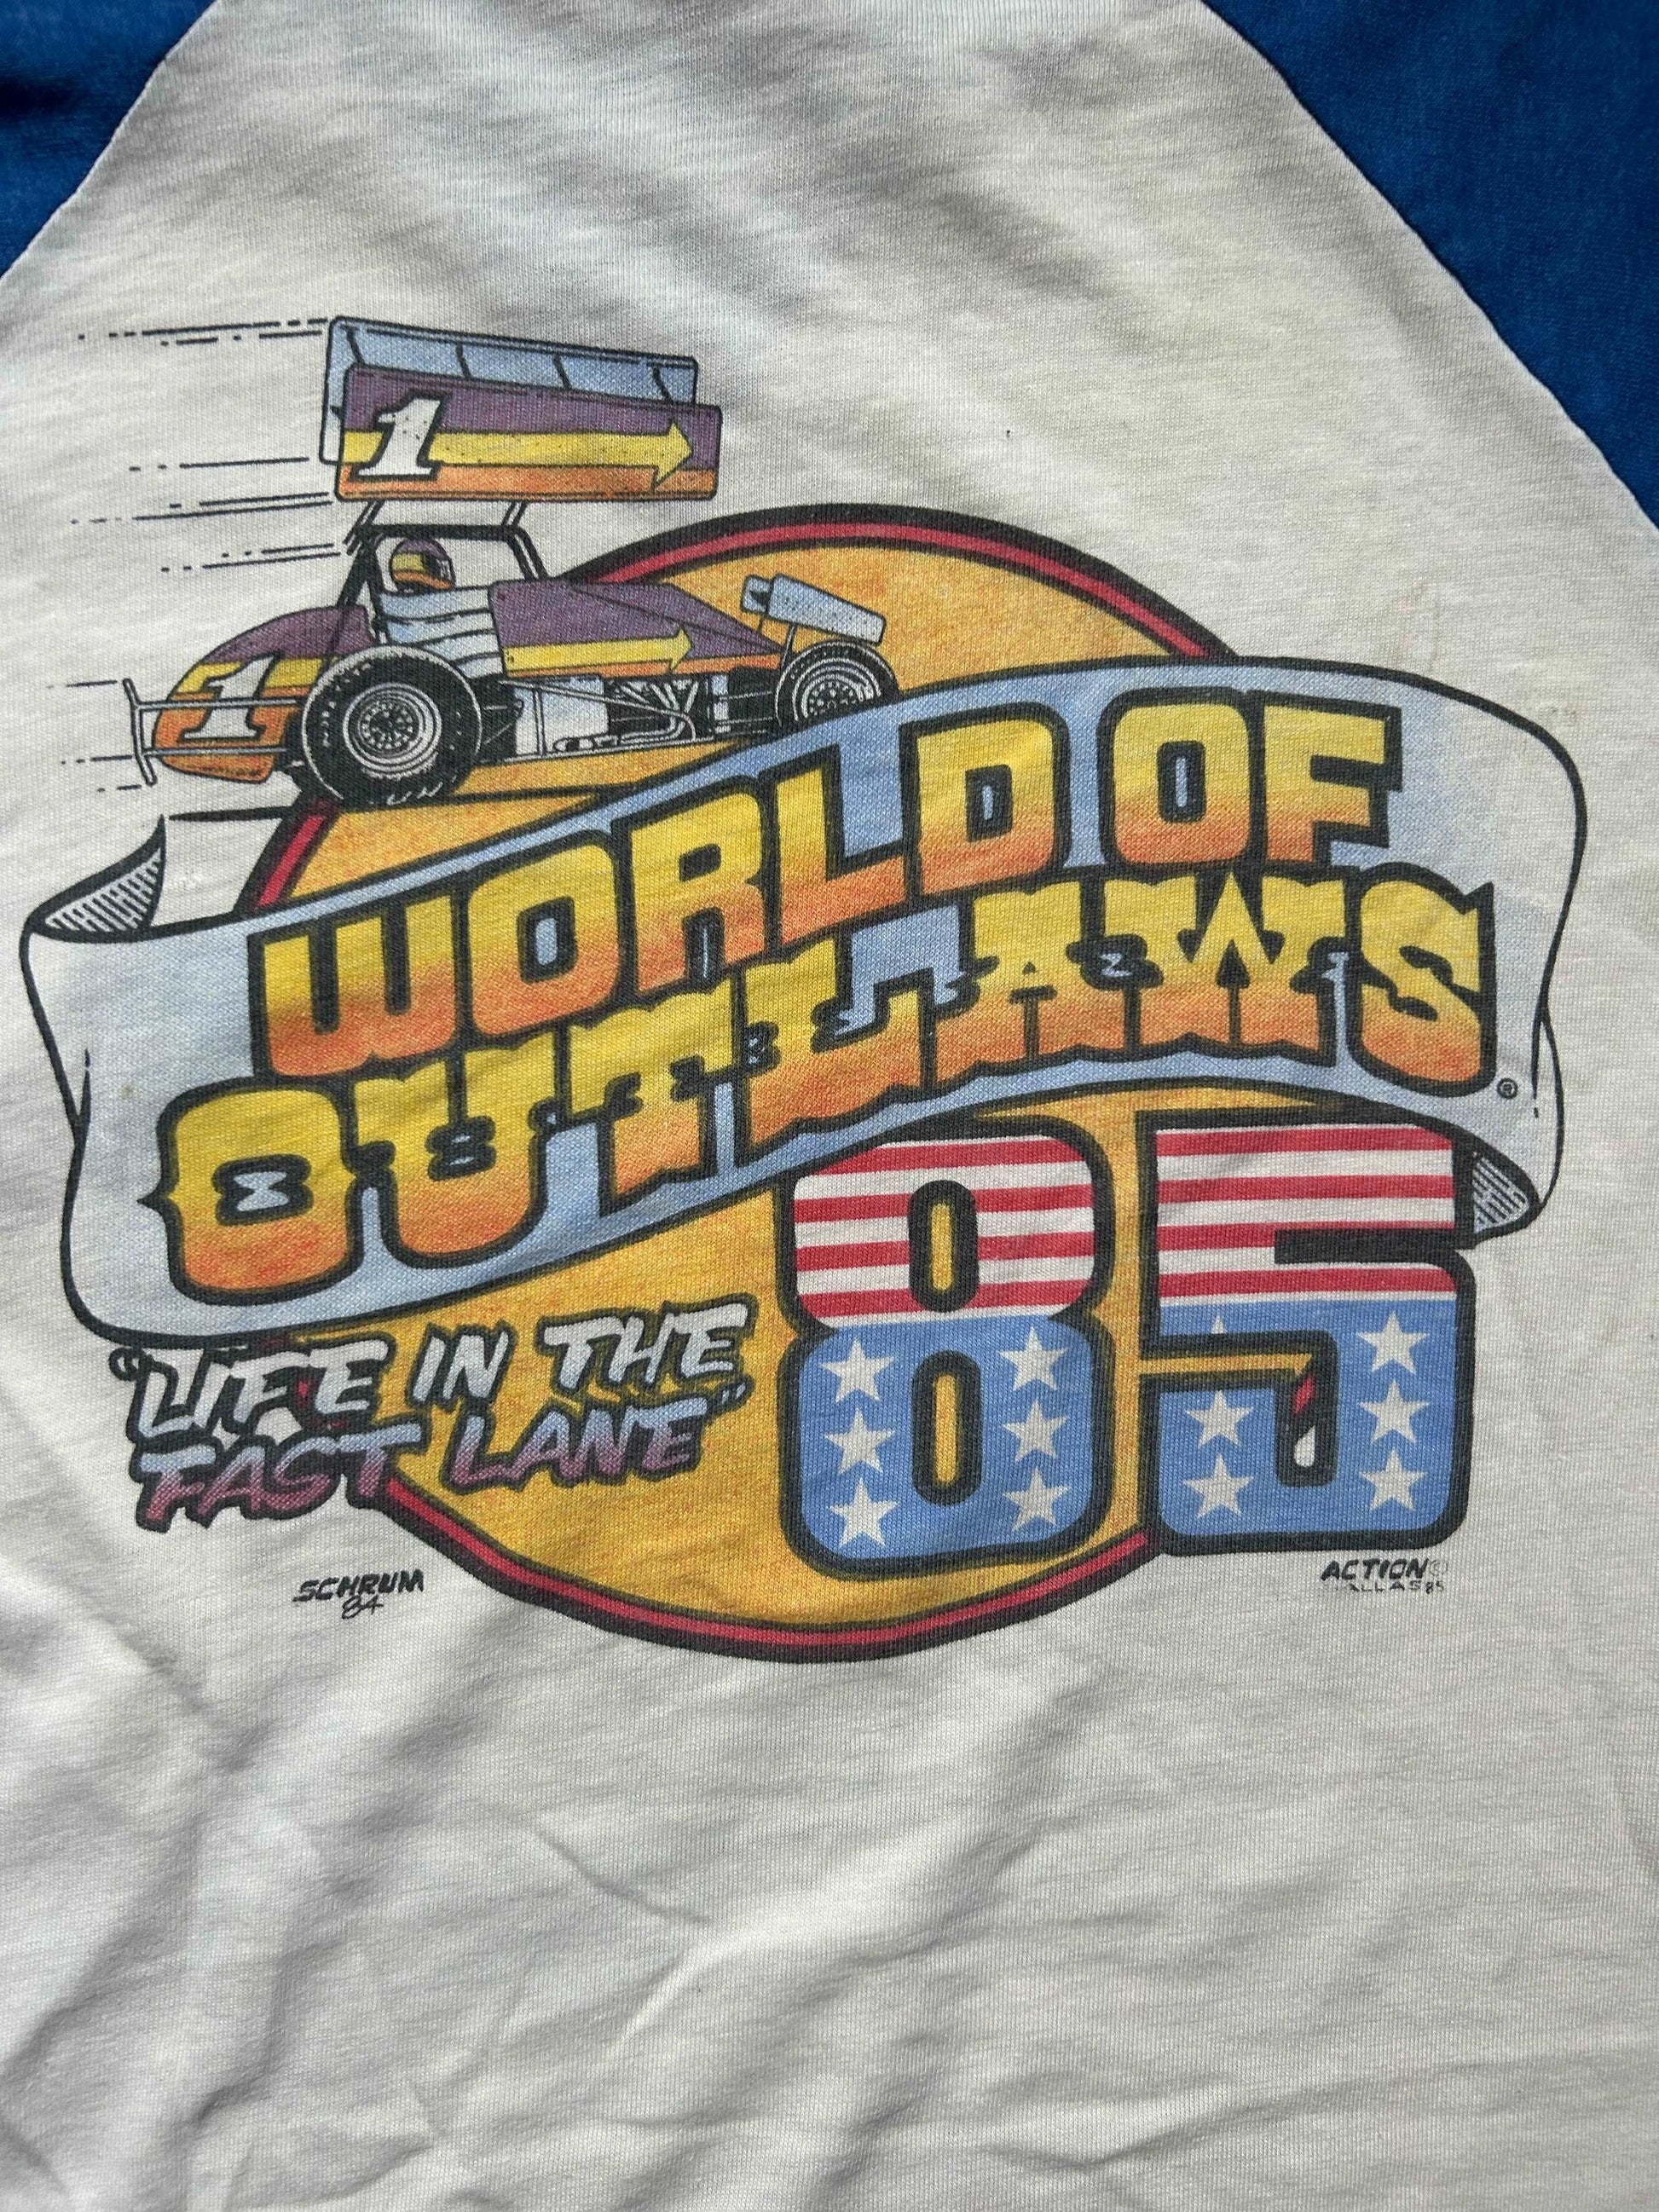 1985 World of Outlaws Racing Tee Size - M